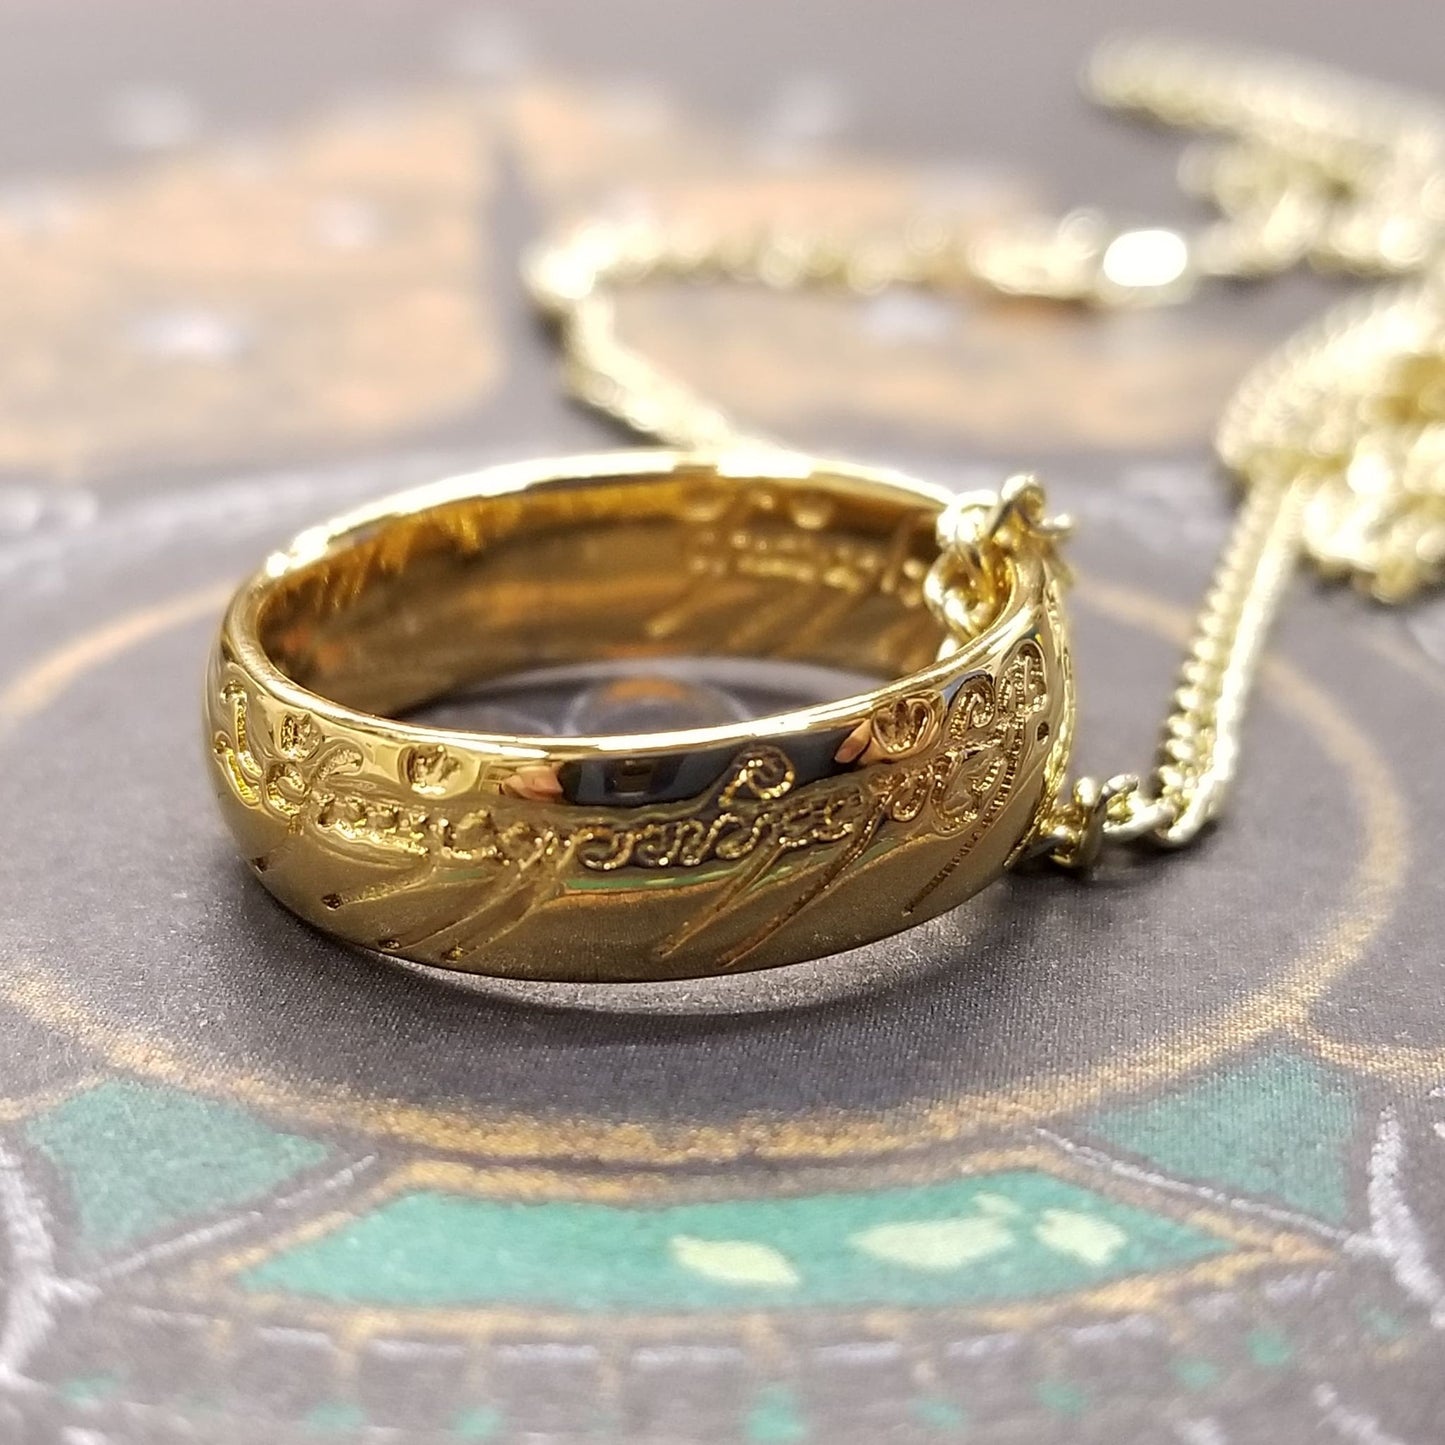 The One Ring™ of Power in Sterling Silver Officially Licensed 